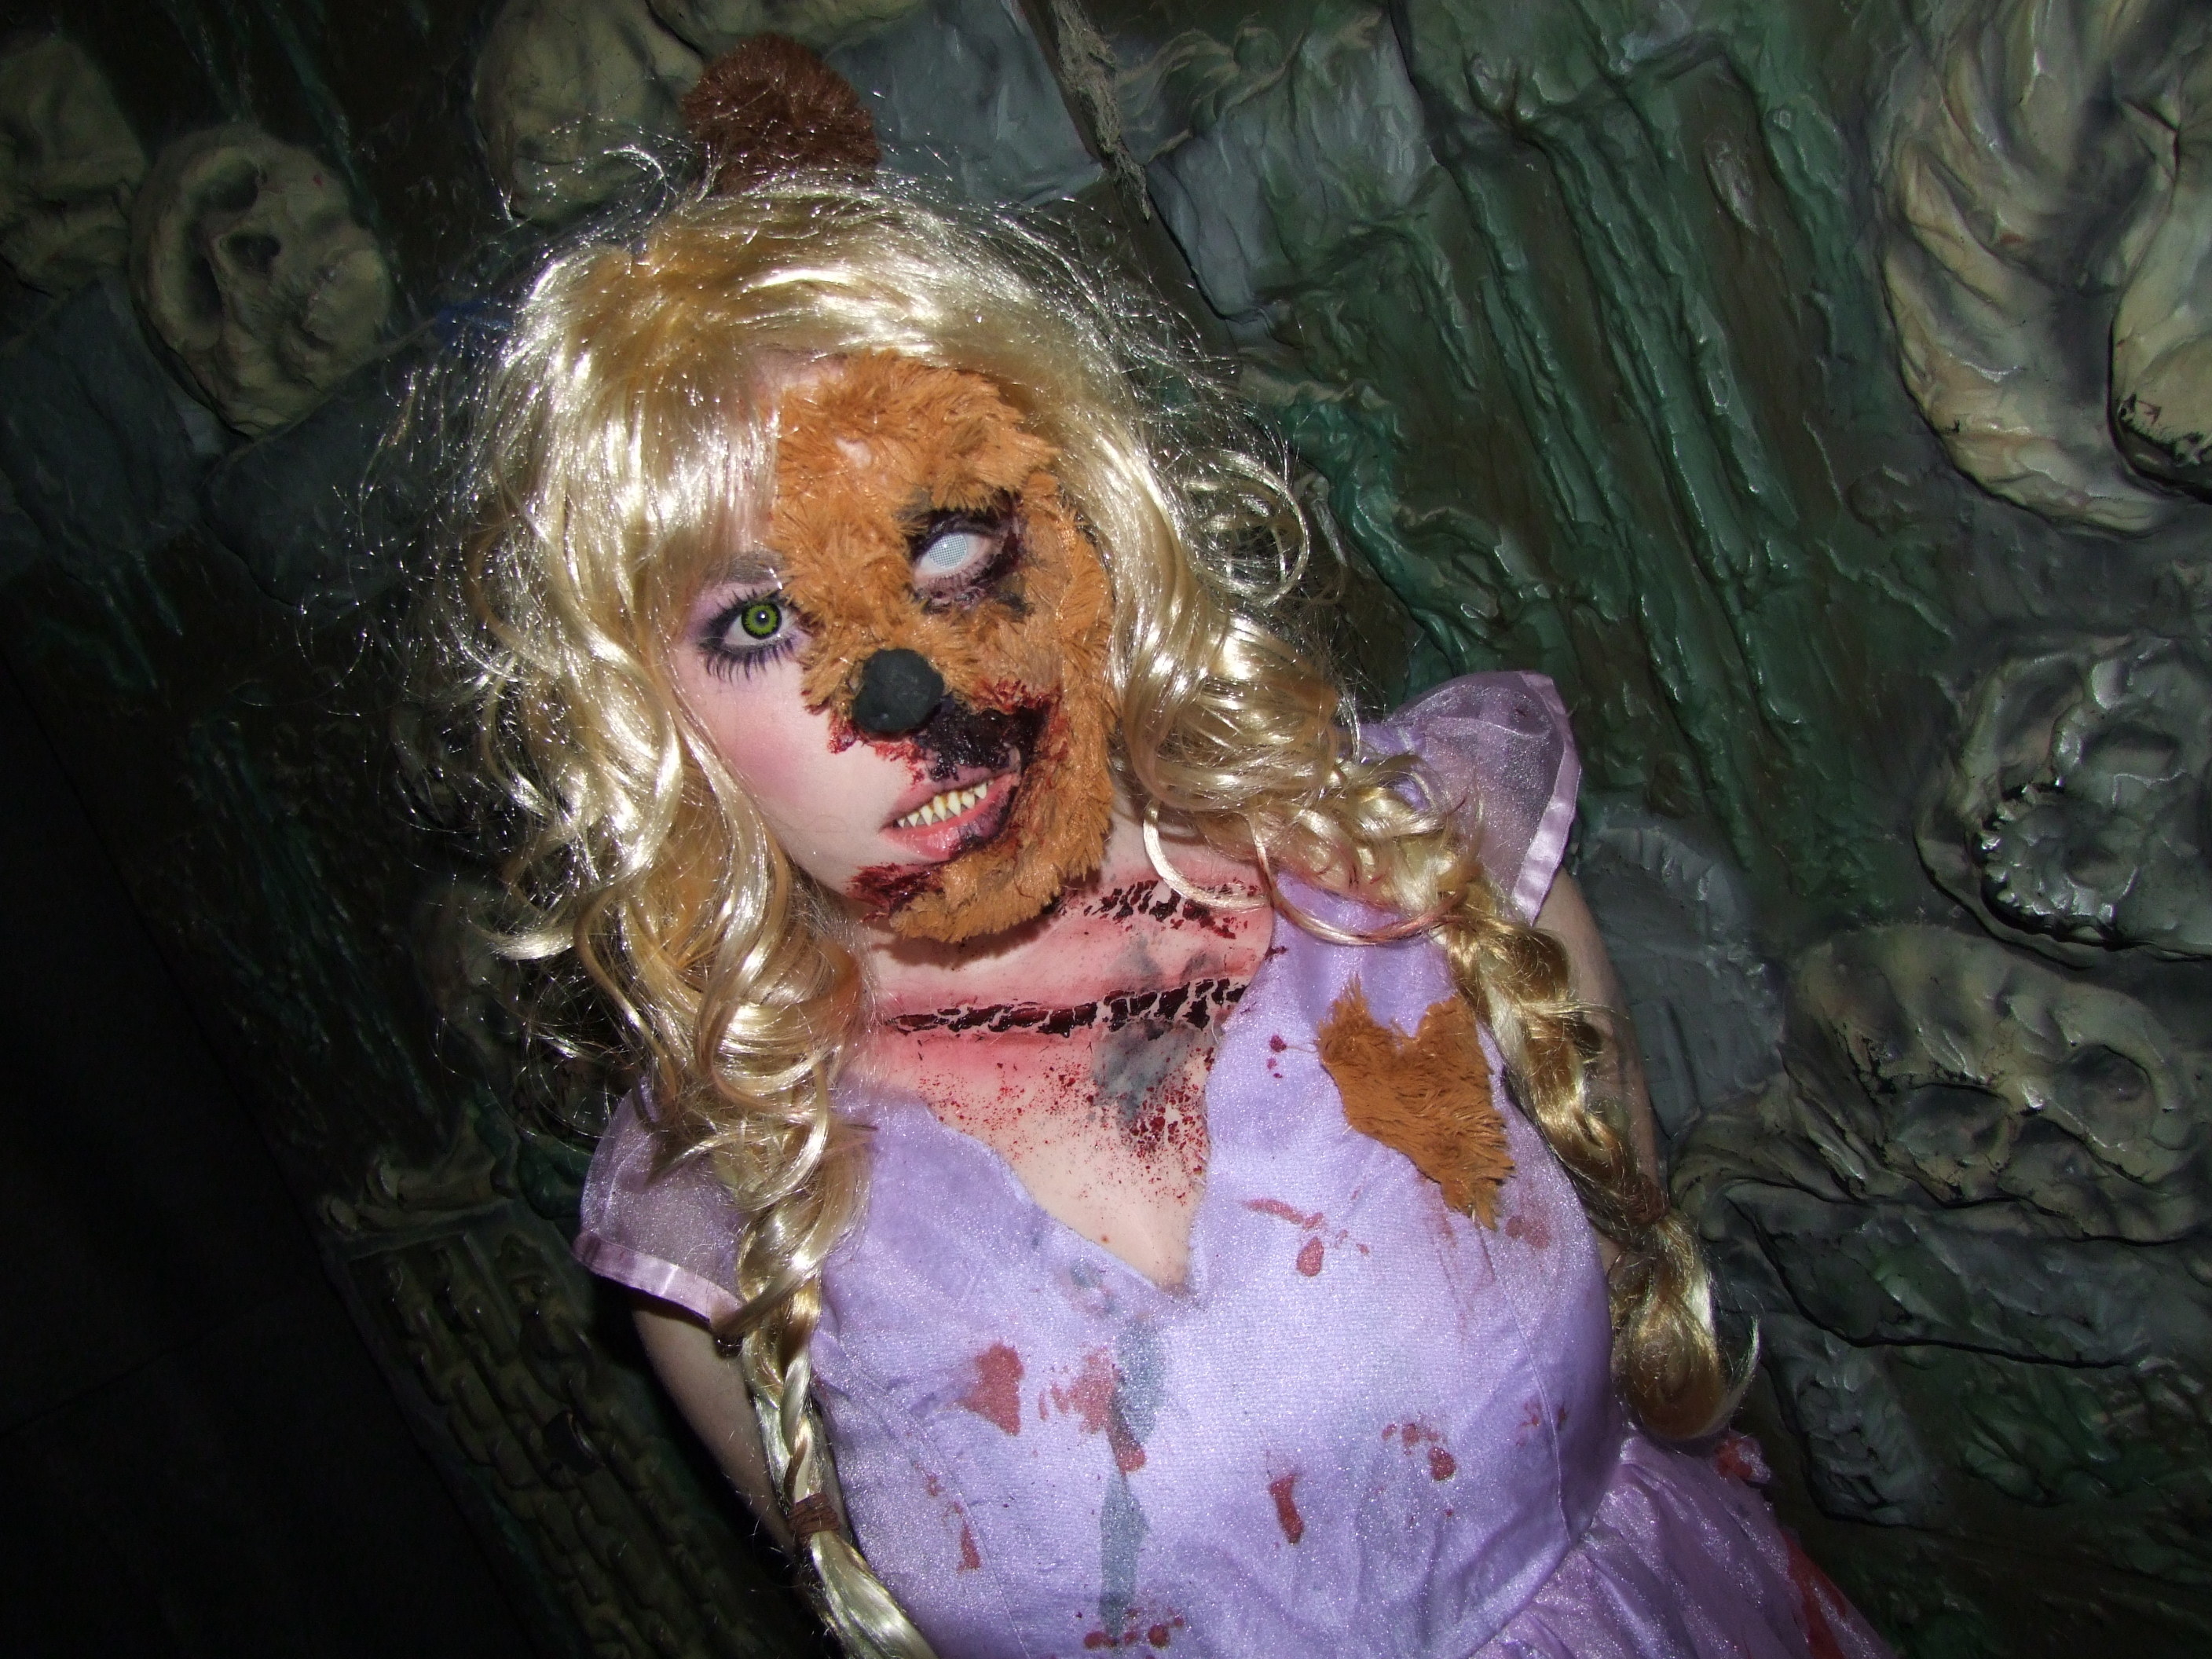 A woman with her face spliced into a teddy bear approaches guests at &quot;Spookers&quot;